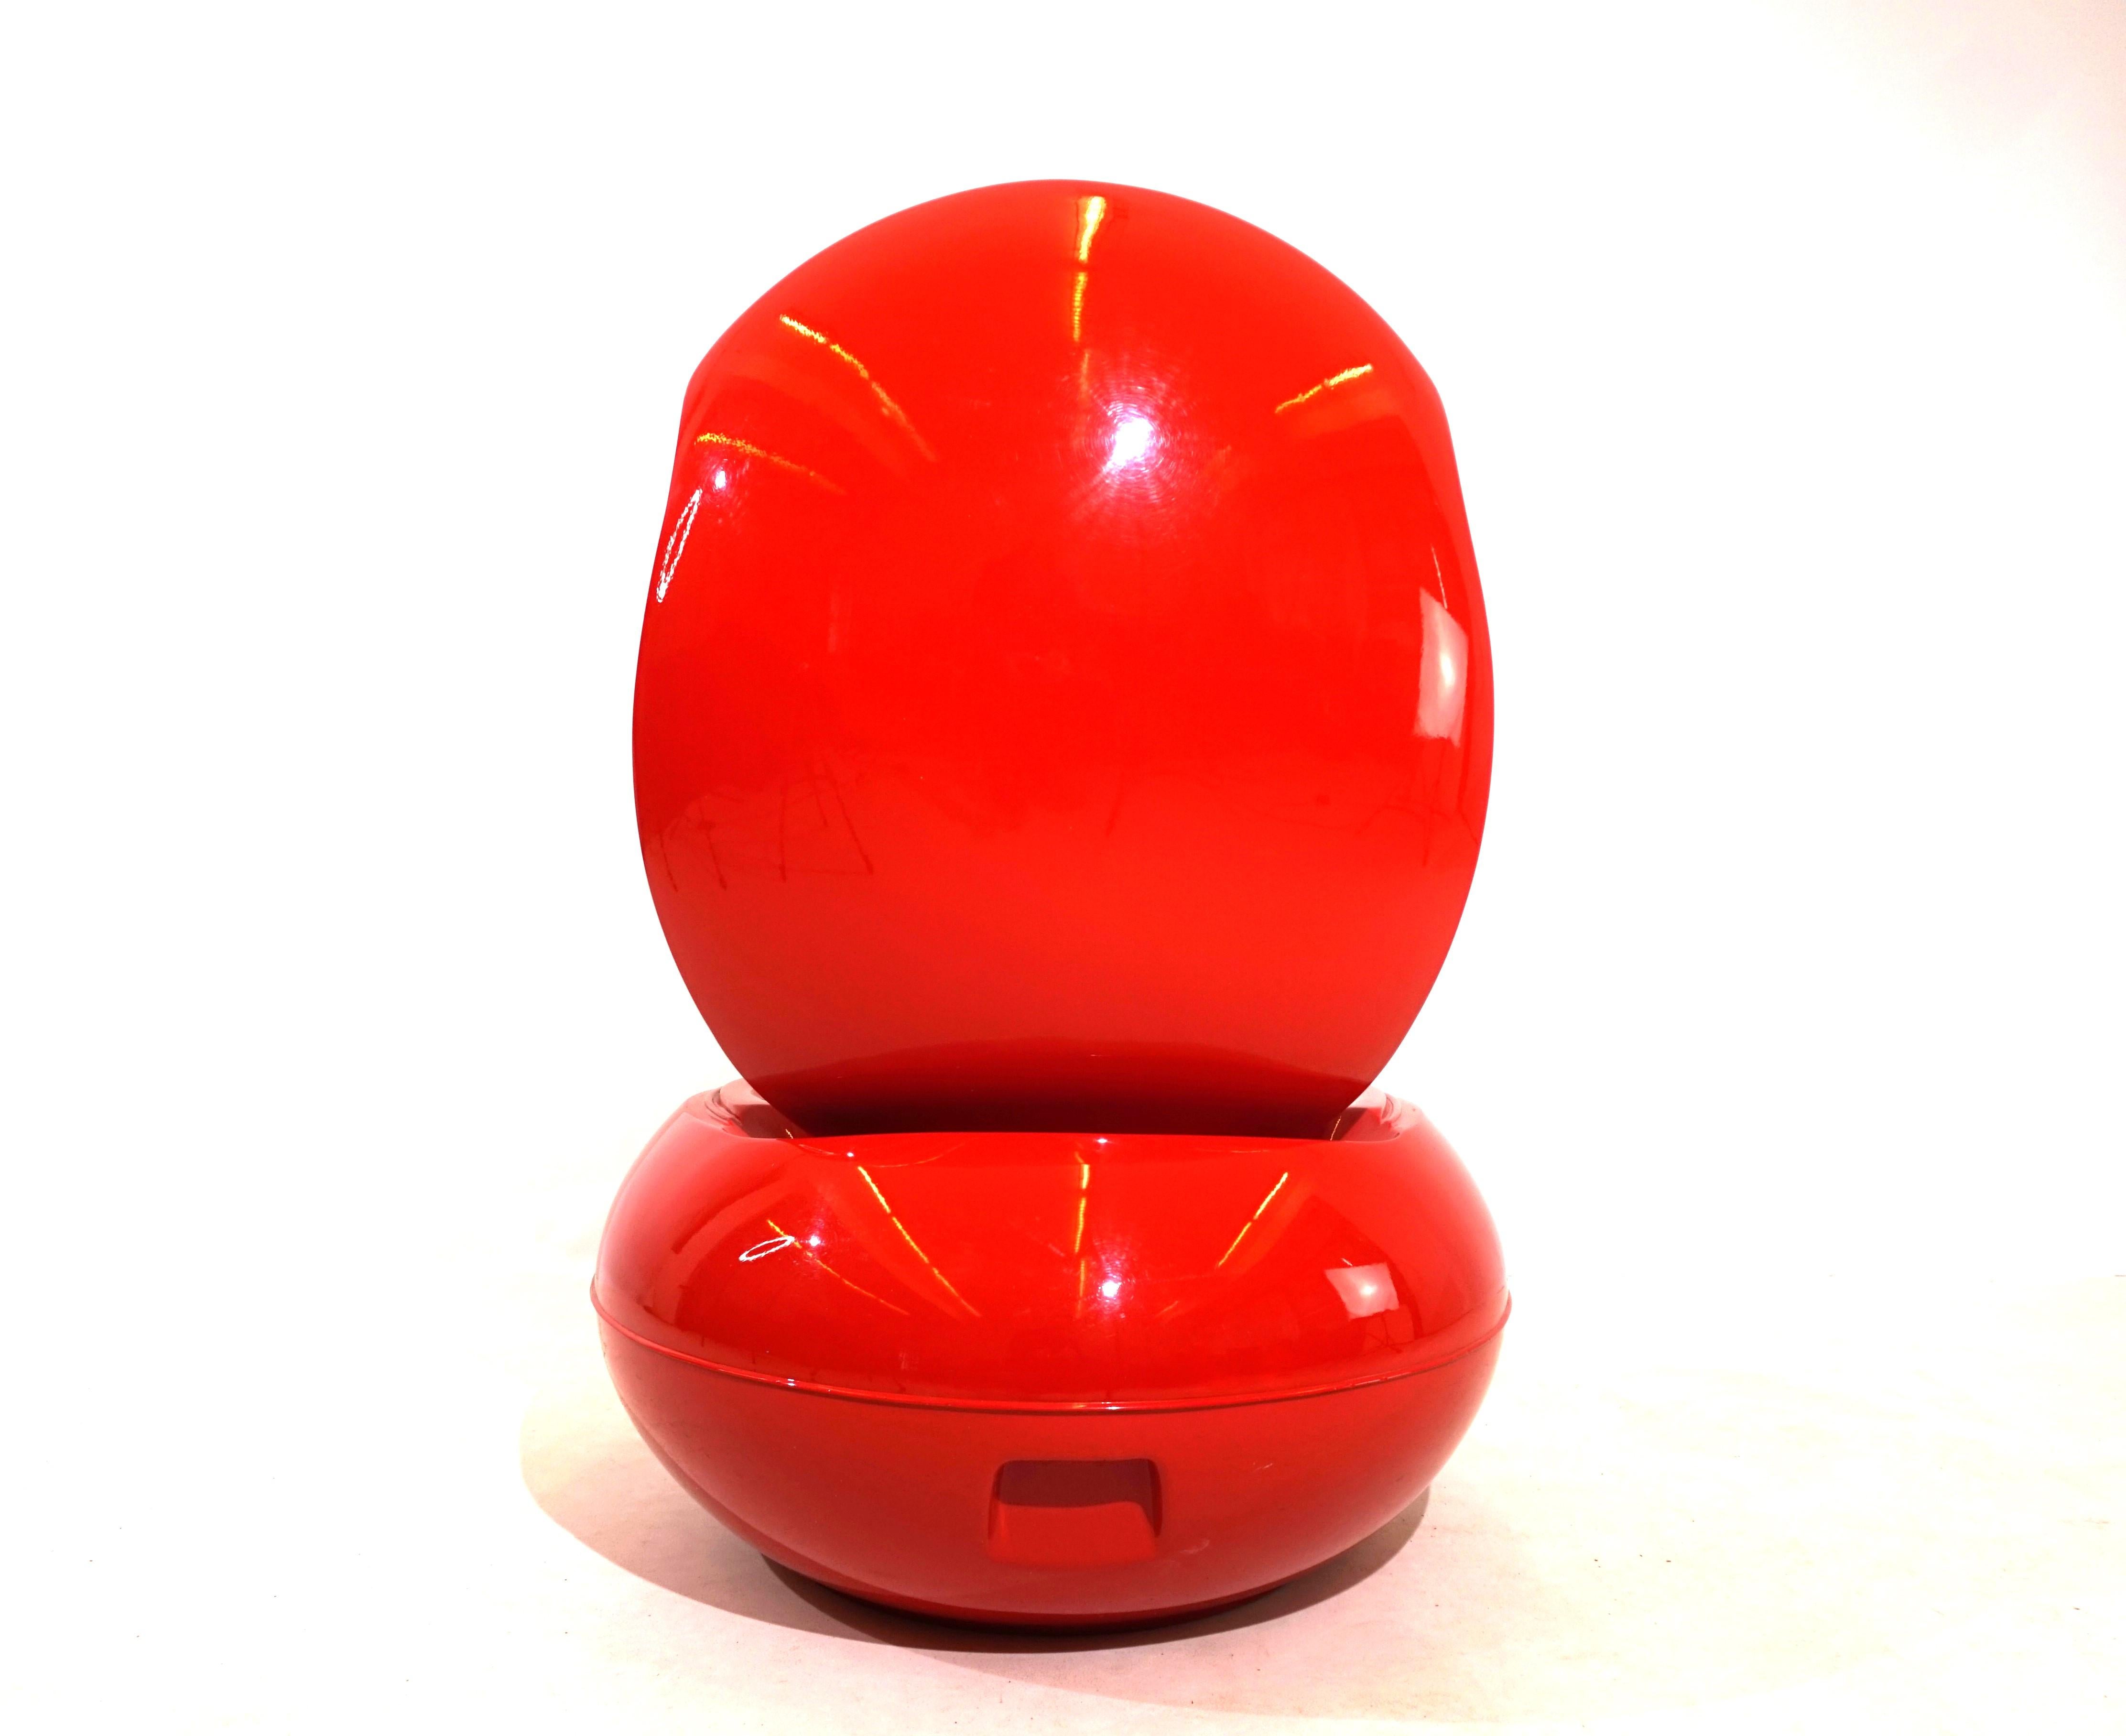 Garden Egg armchair by Peter Ghyczy for Reuter In Good Condition For Sale In Ludwigslust, DE